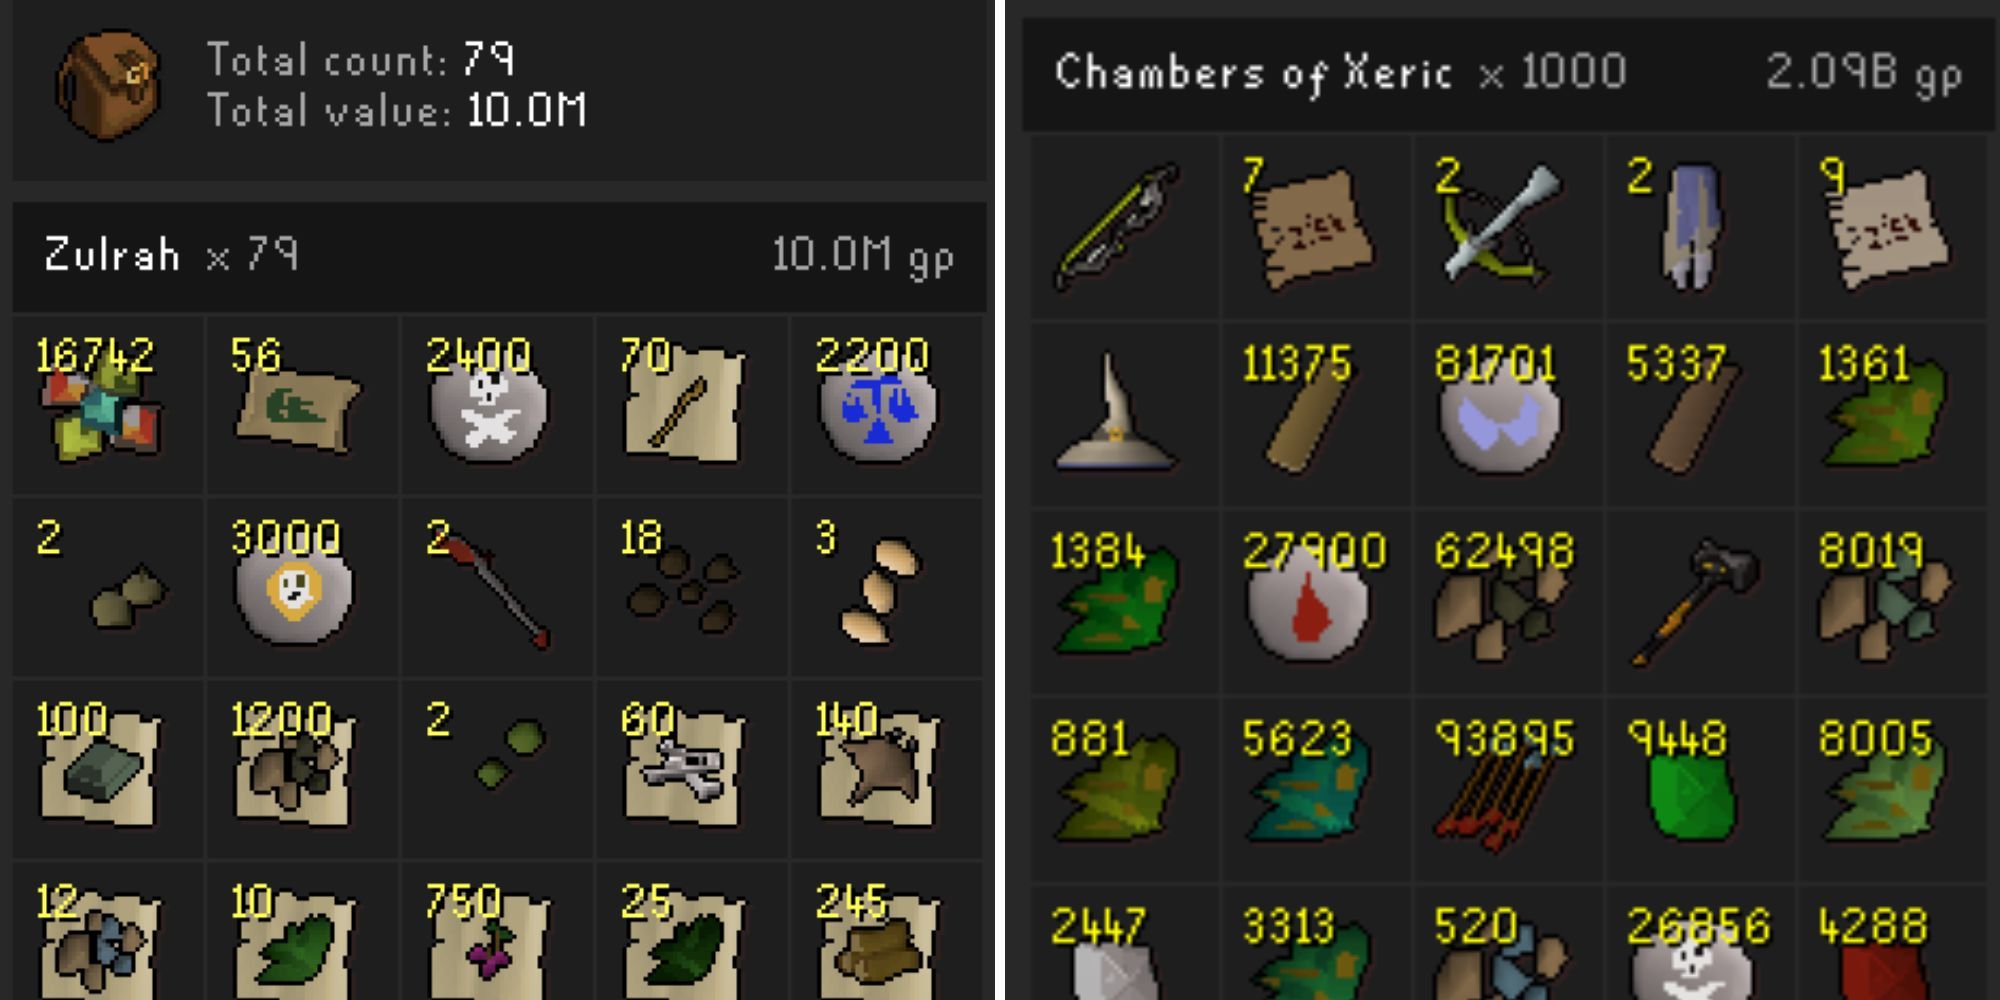 A split image showing the cumulative loot of multiple zulrah and Chambers of Xeric runs, respectively.